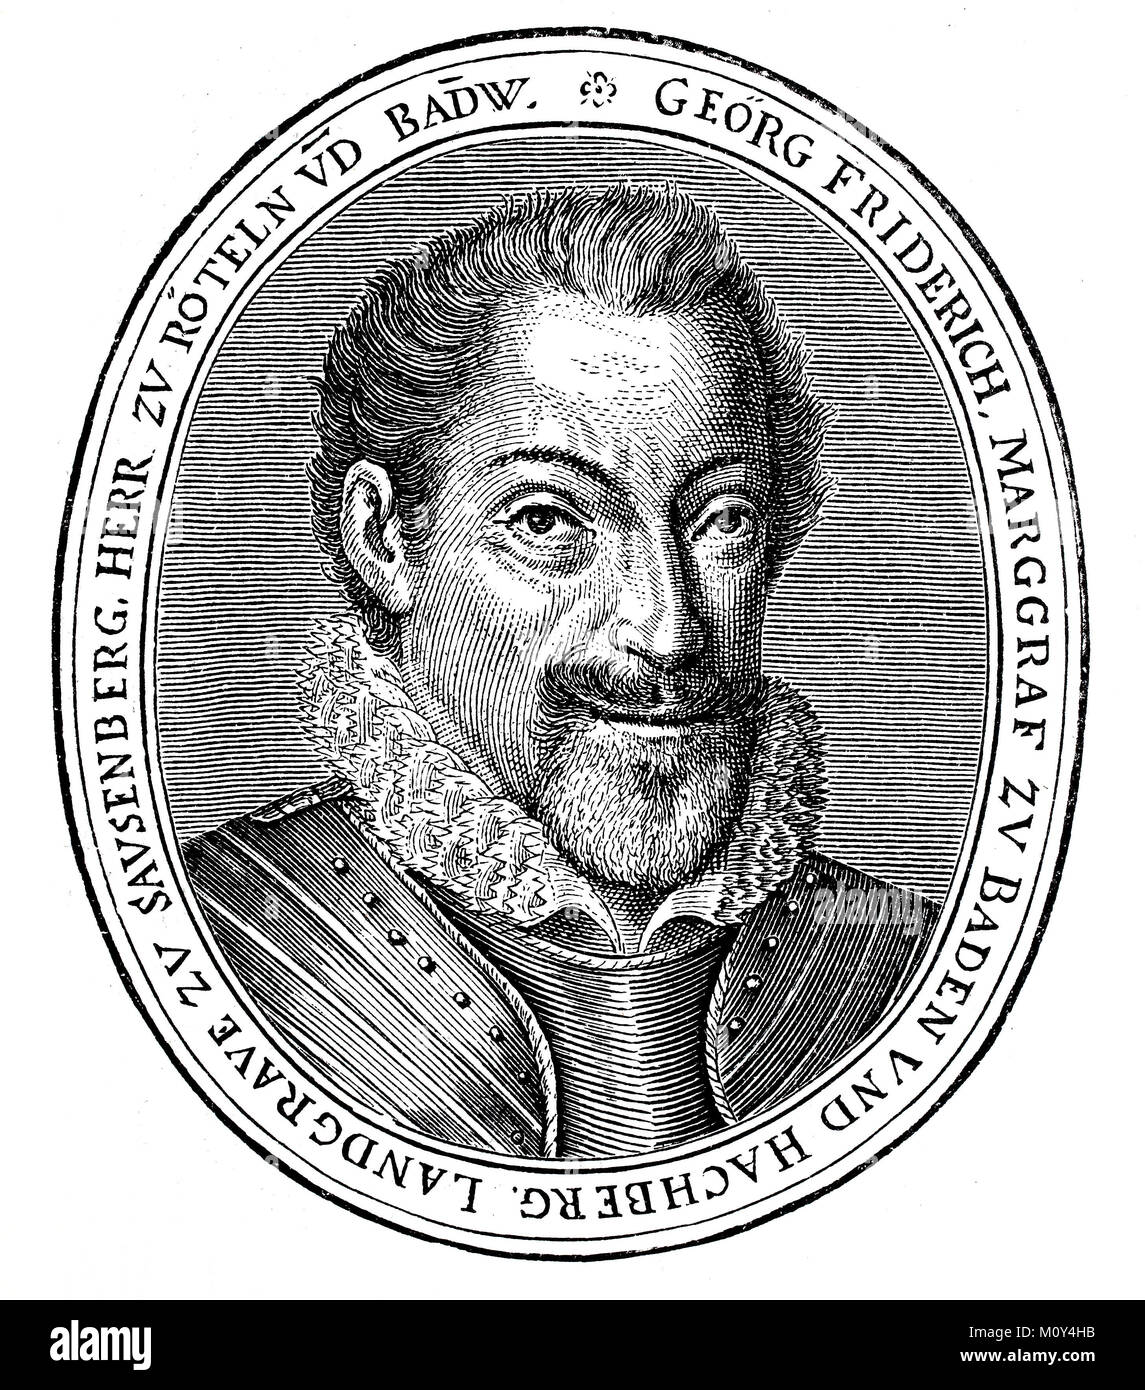 Georg Friedrich, January 30, 1573 - September 24, 1638, was Margrave of Baden-Durlach in 1604-1622 and Protestant commander in the Thirty Years War, digital improved file of a original print of the 19. century Stock Photo